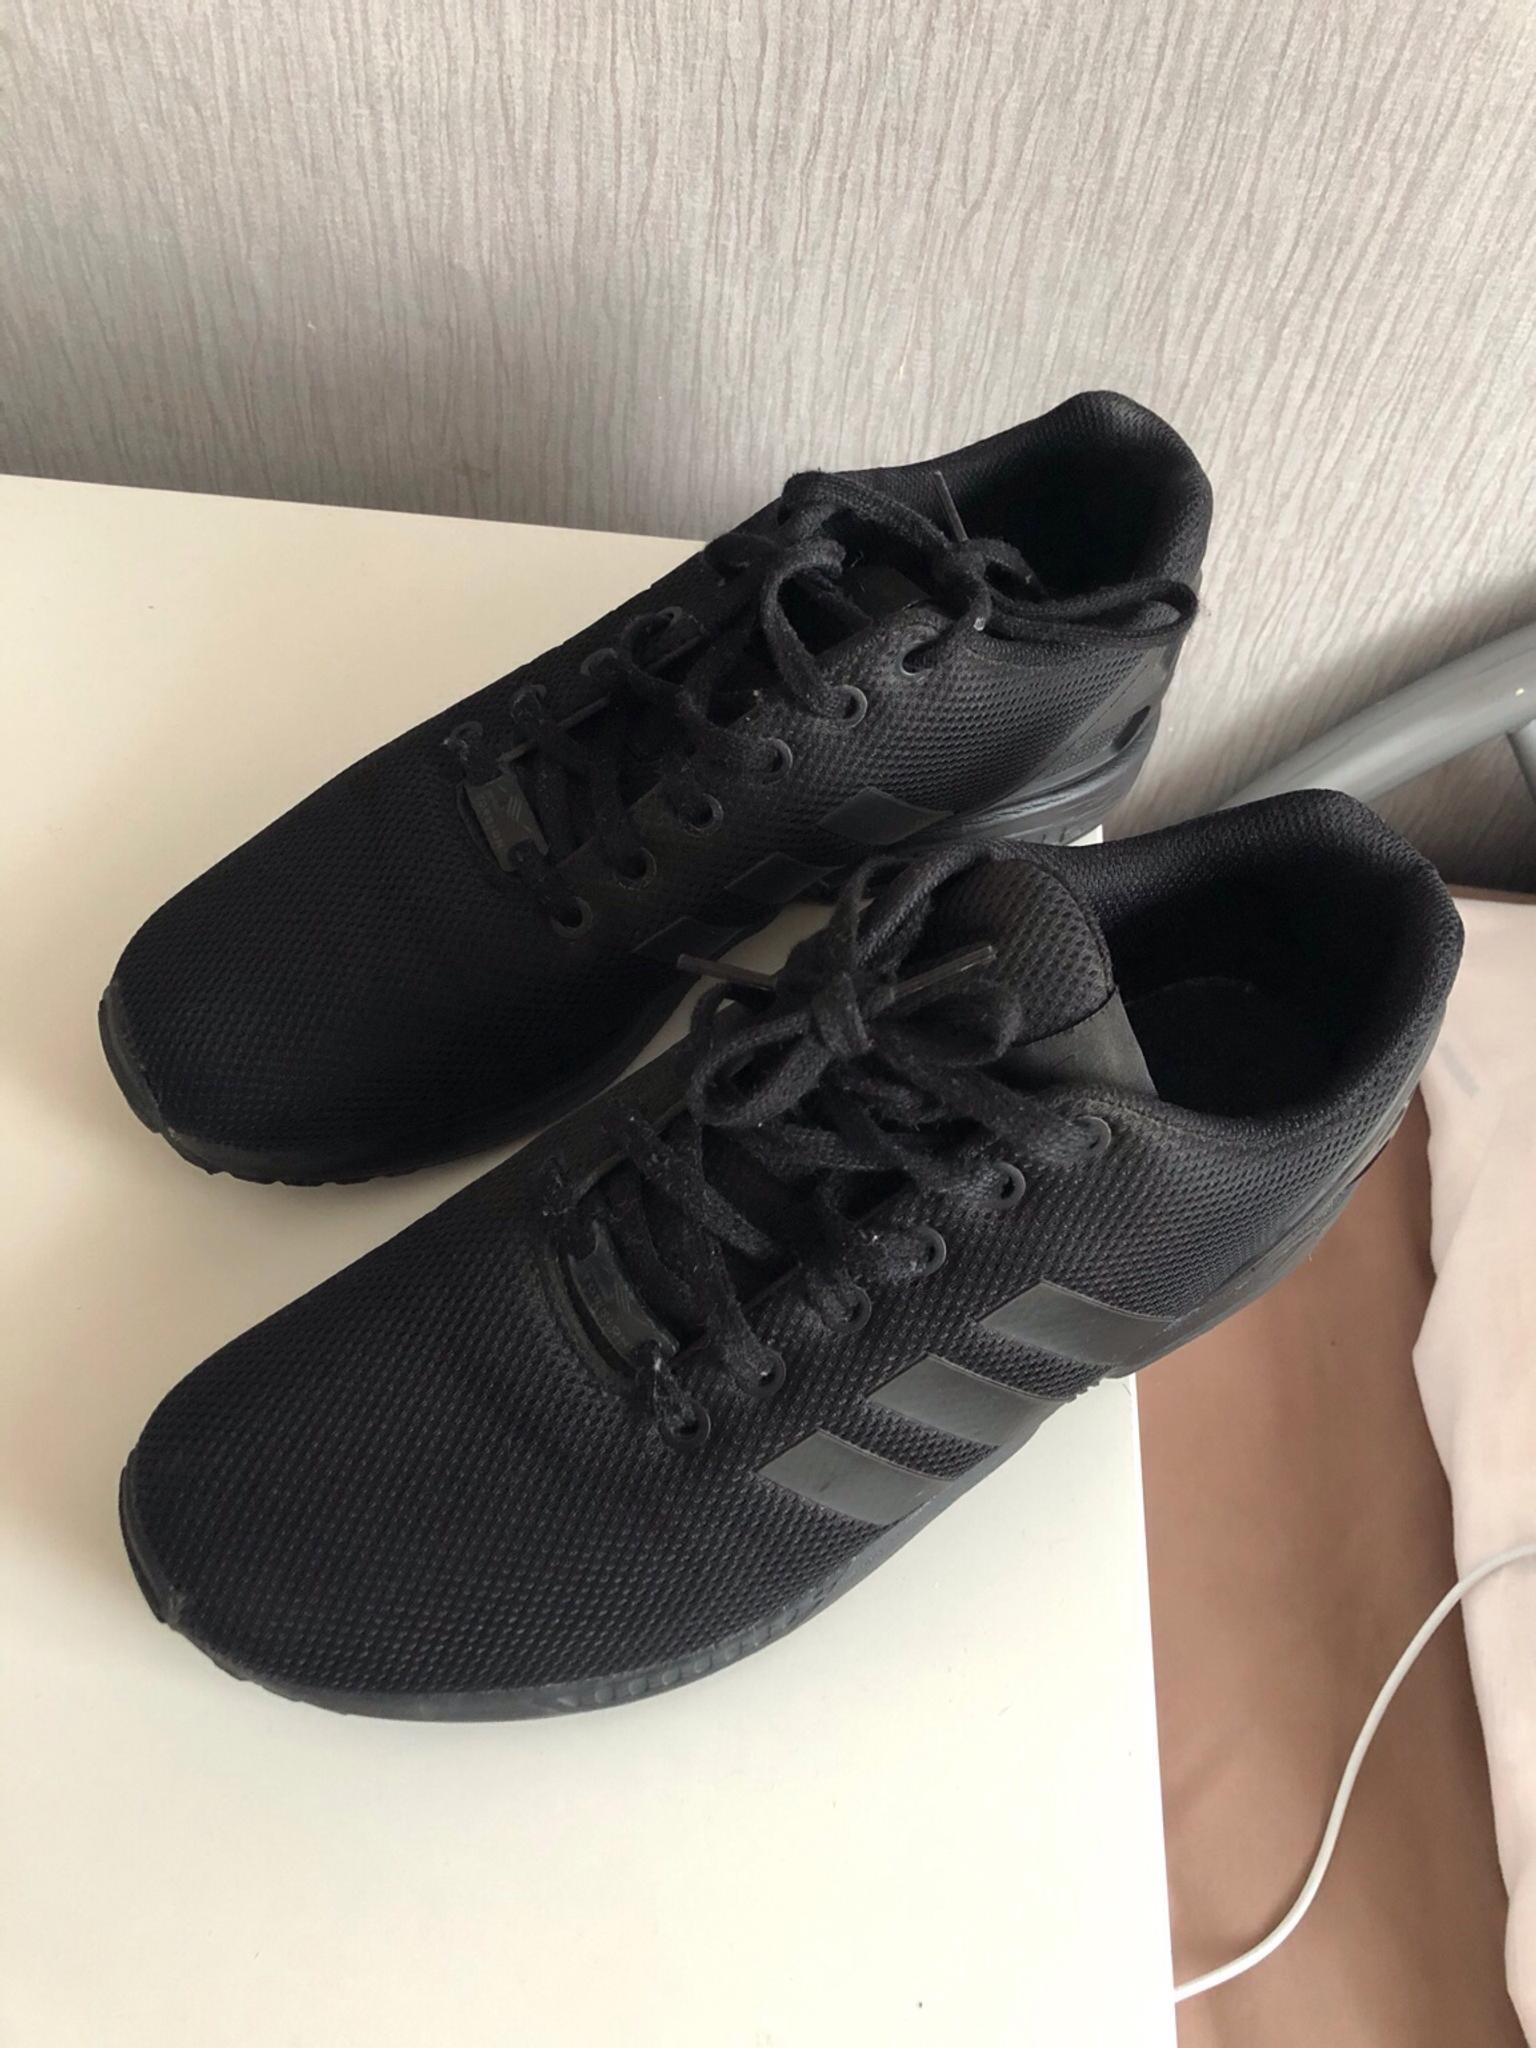 mens black adidas trainers size 10